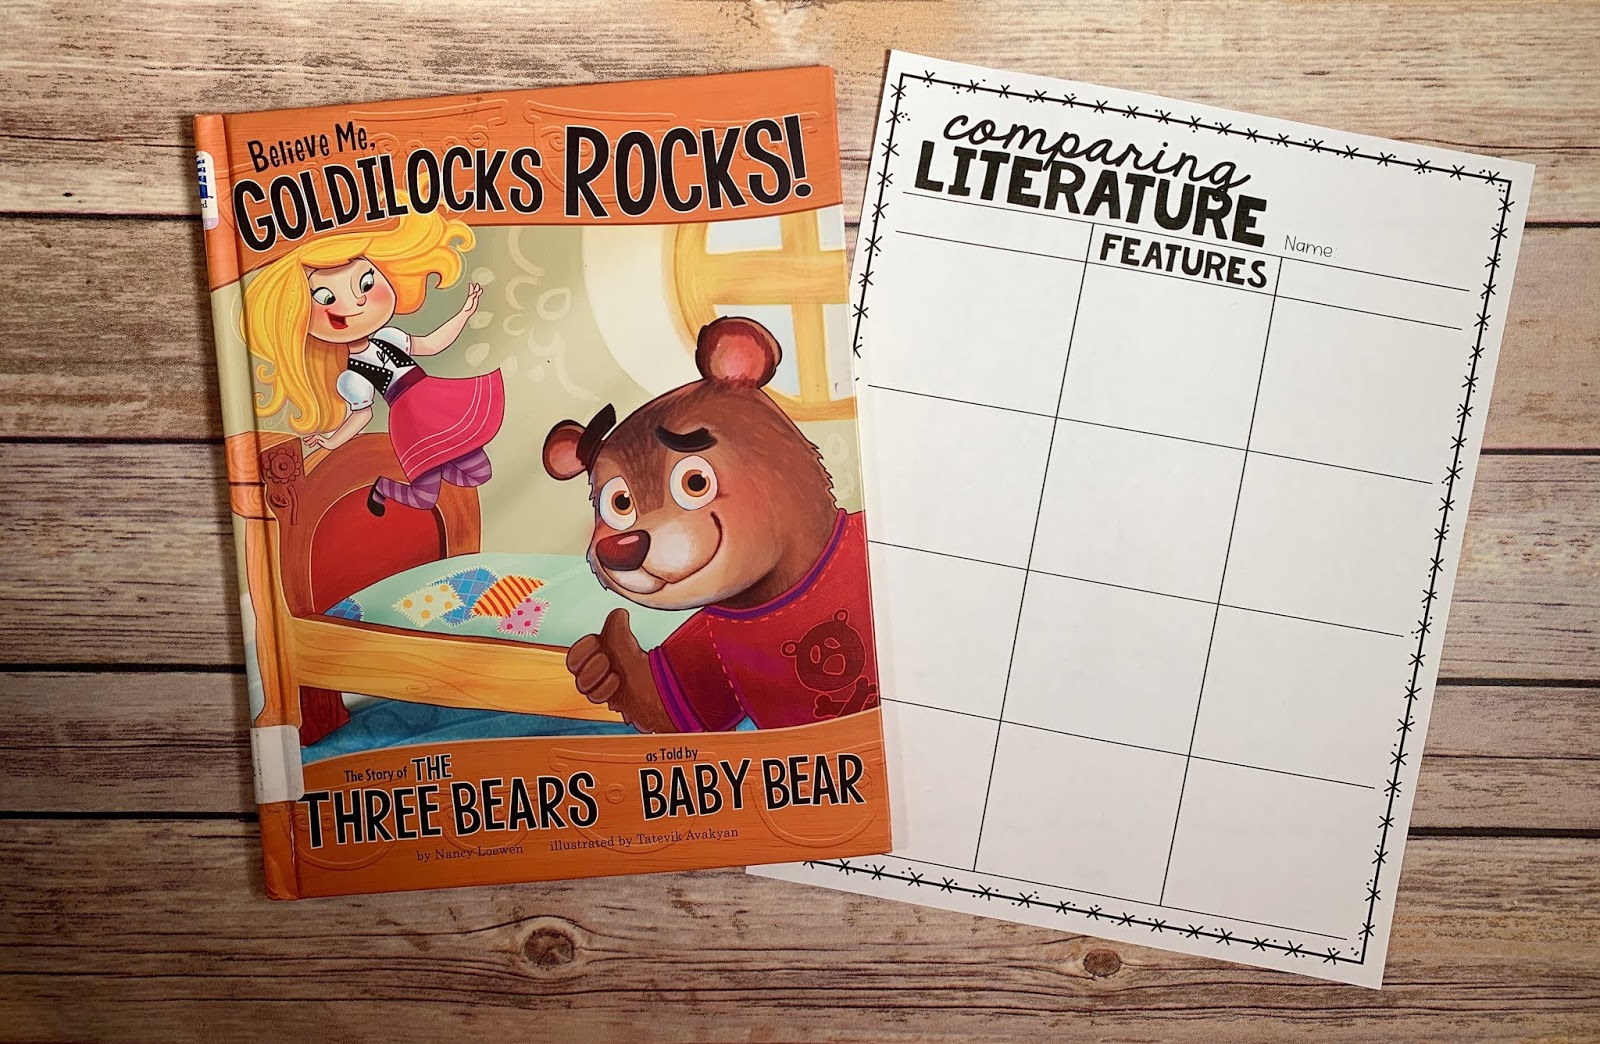 Mentor Text with text "Believe Me, Goldilocks Rocks!" and Graphic Organizer with text "Comparing Literature" 